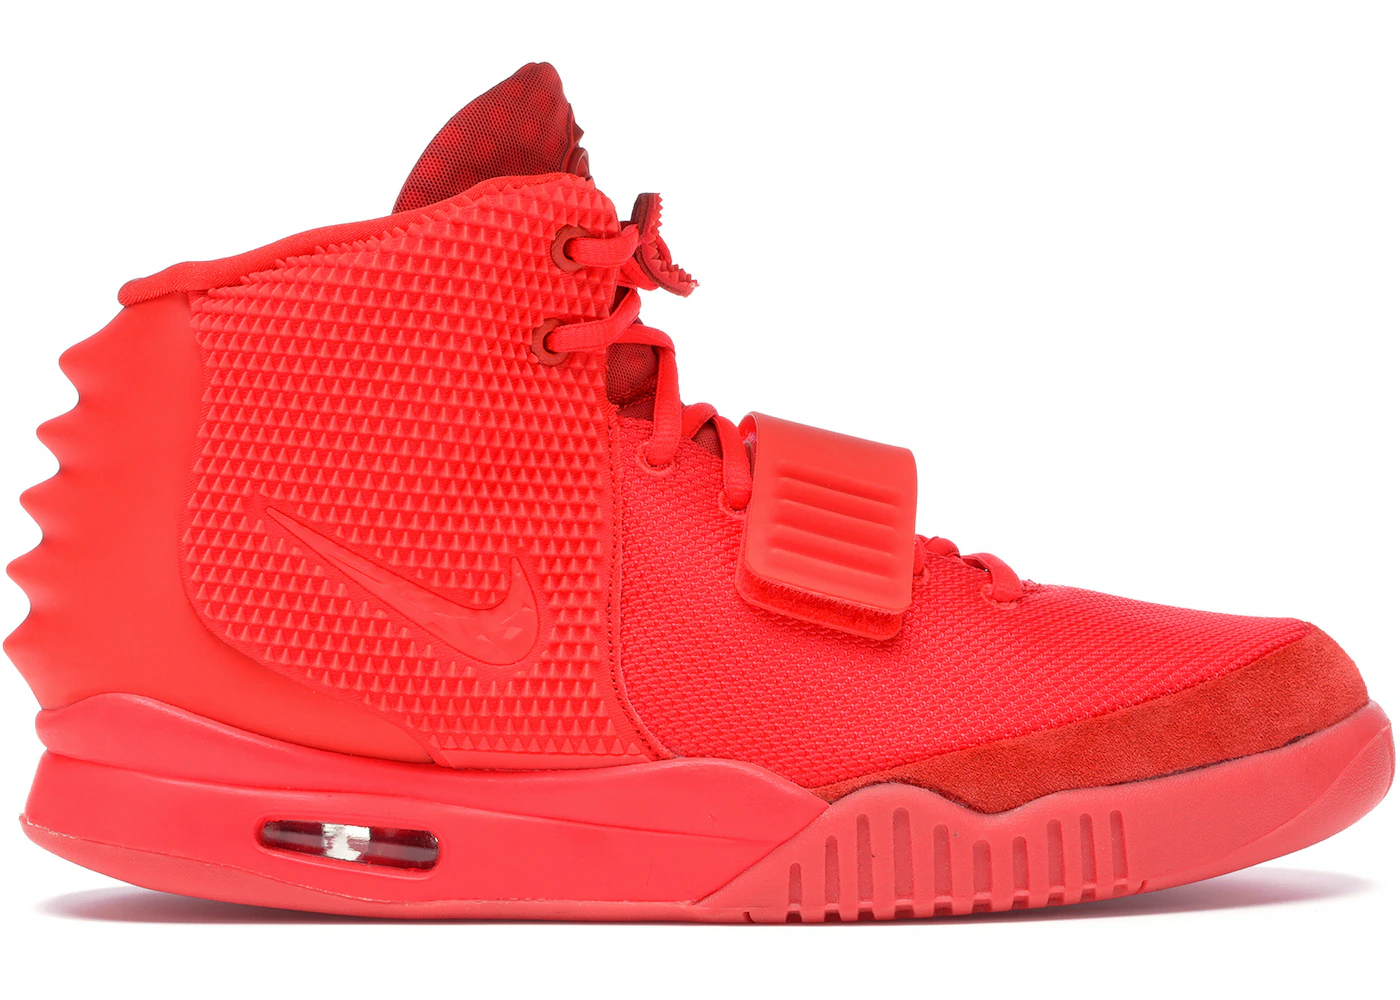 Martin Luther King Junior prose Adjustable Nike Air Yeezy 2 Red October - 508214-660 - US